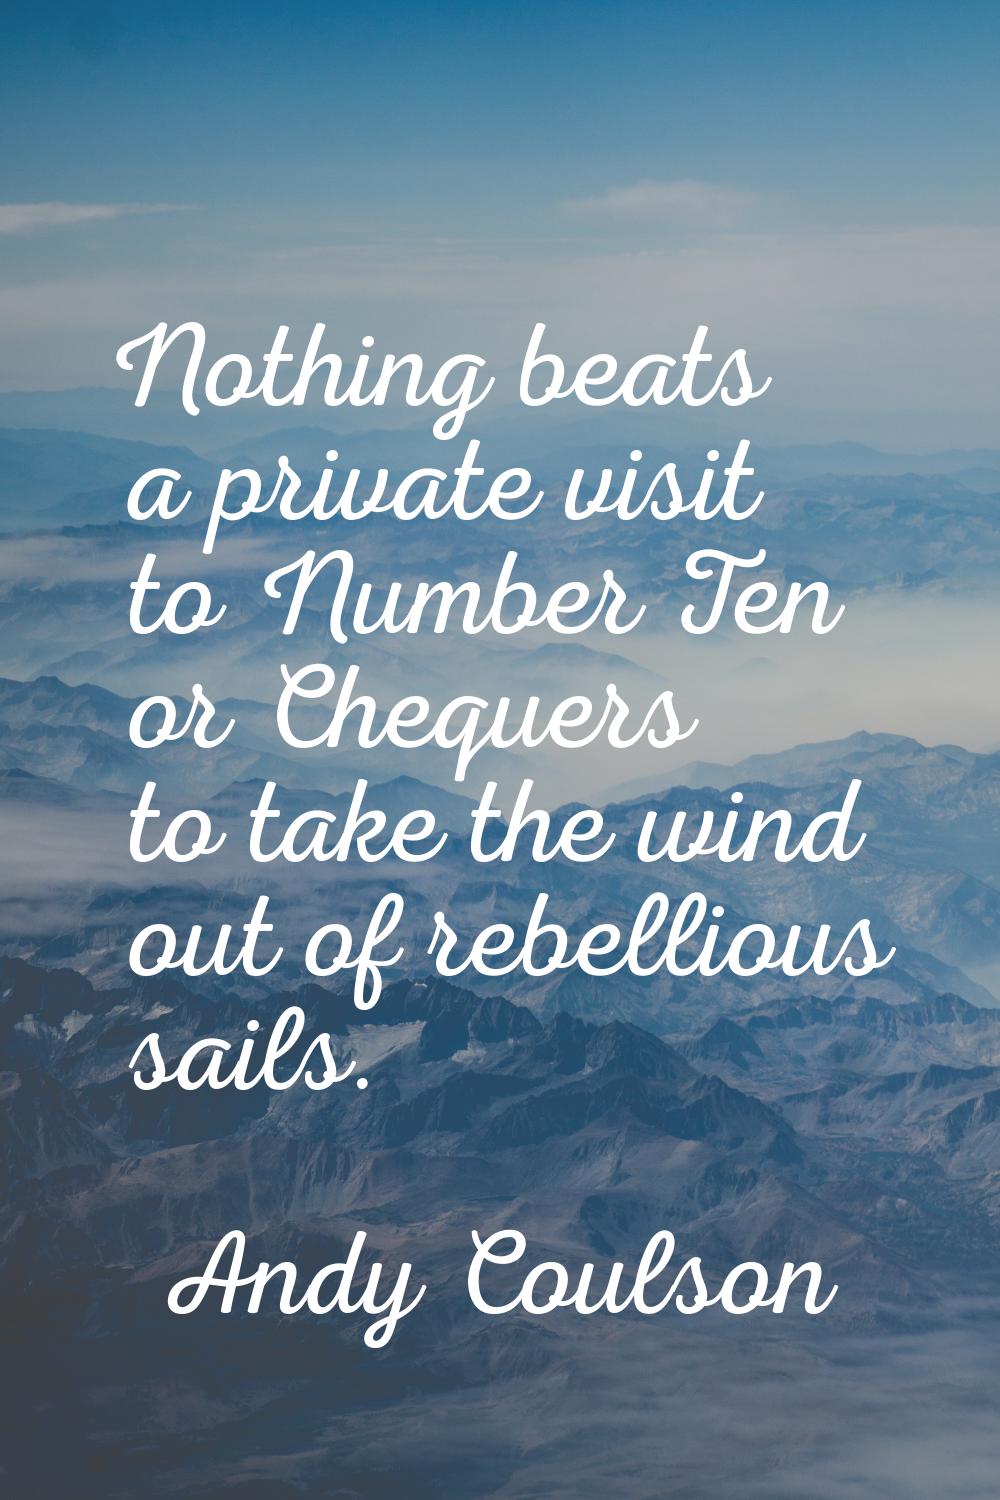 Nothing beats a private visit to Number Ten or Chequers to take the wind out of rebellious sails.